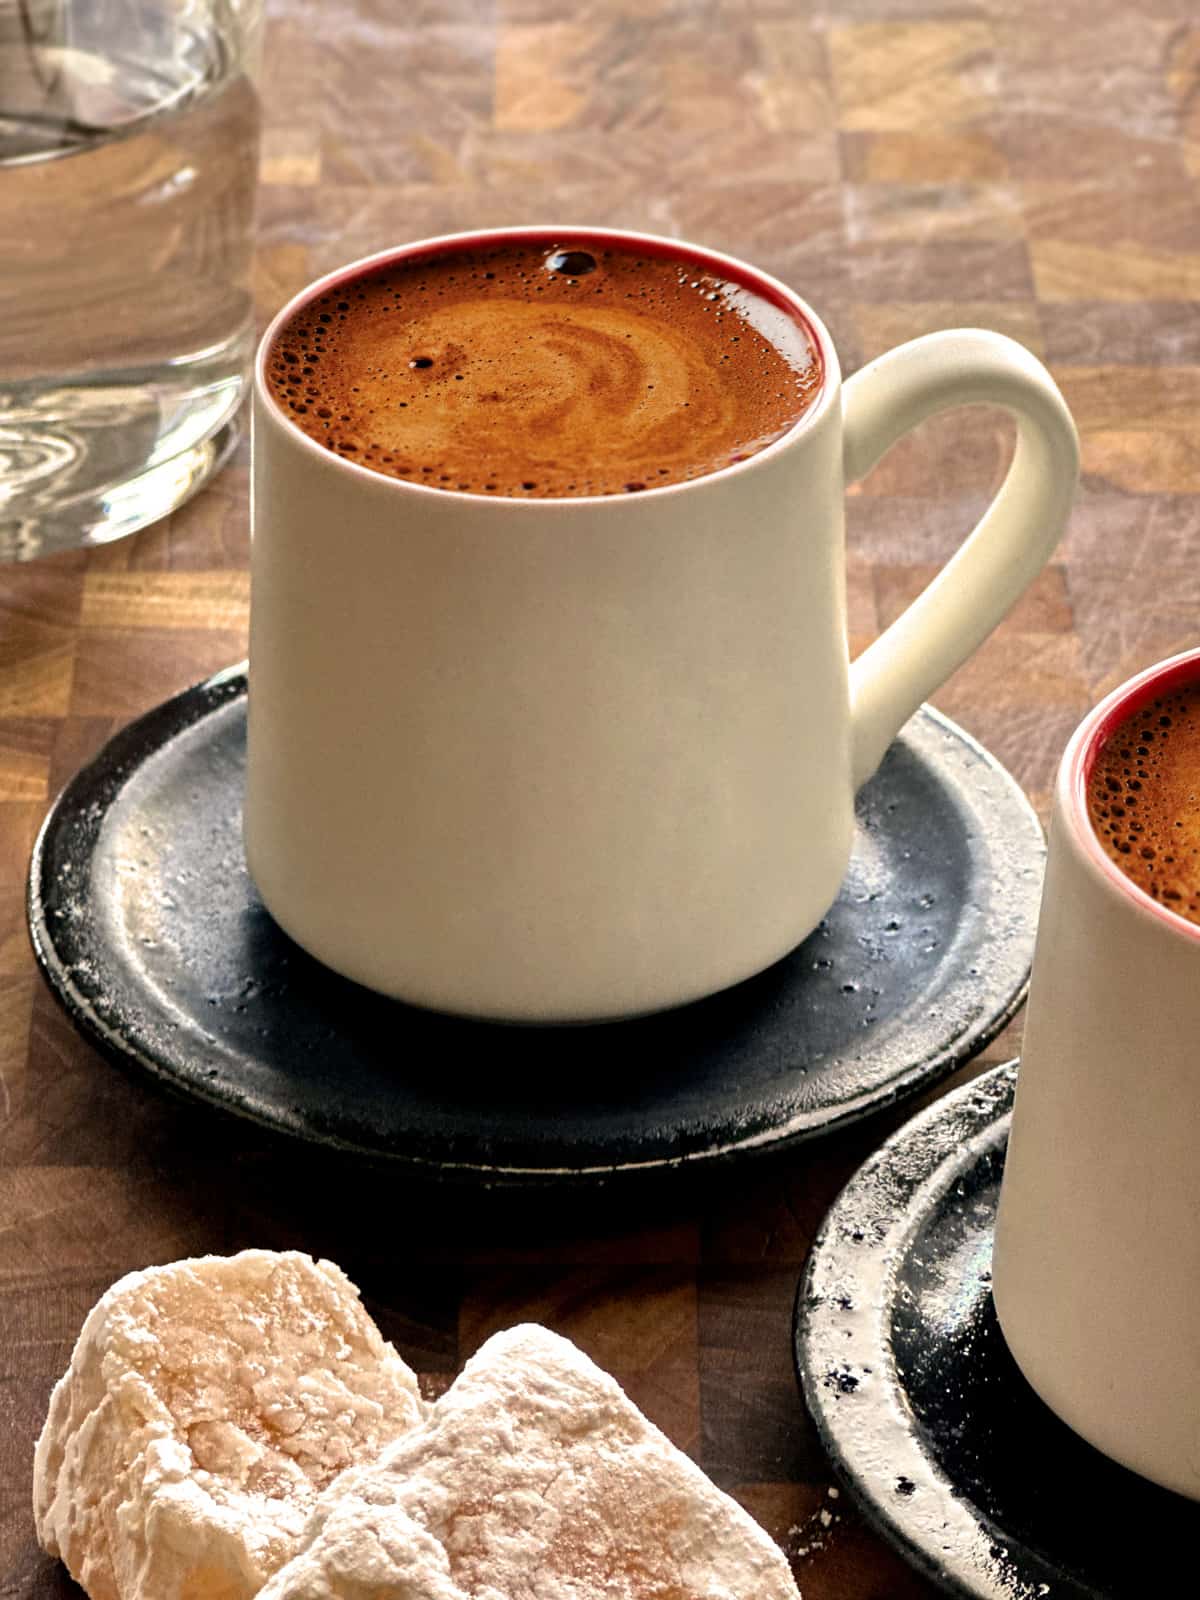 A white cup with Greek coffee on black saucer, and partial views of another cup and a glass of water . At the bottom are two Turkish delights.